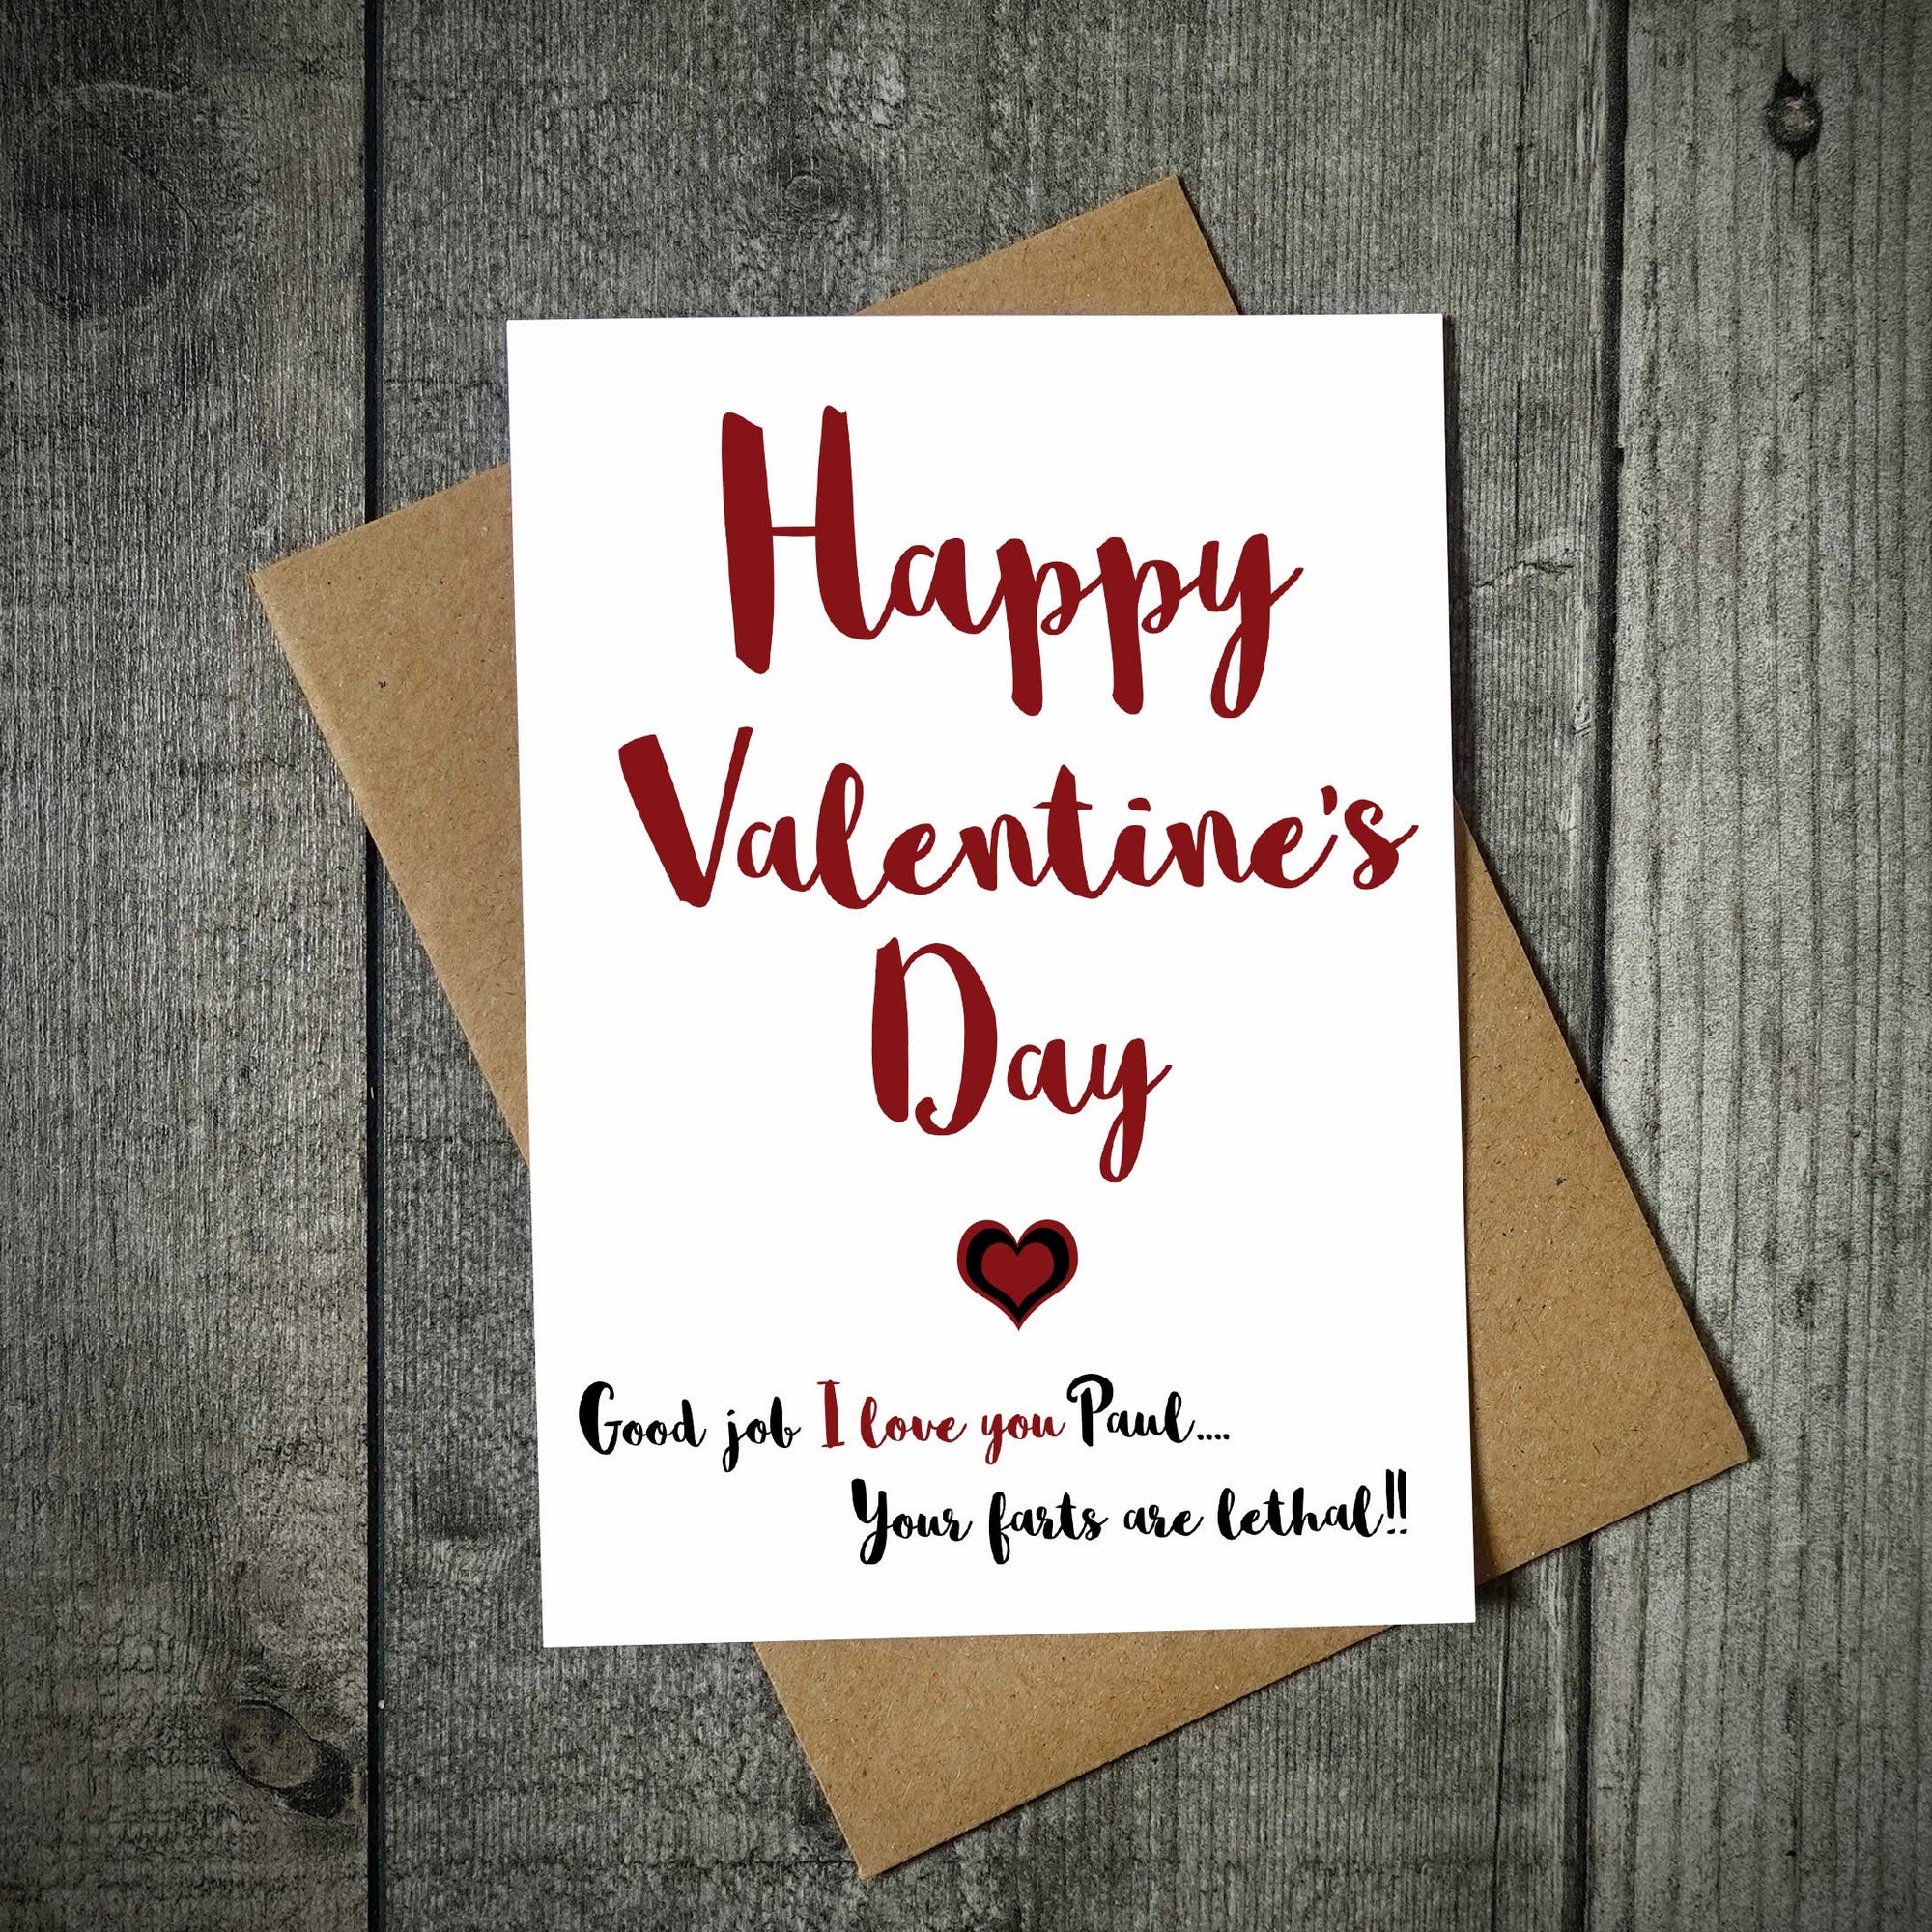 Good Job I Love You Your Farts Are Lethal Personalised Funny Valentine's Card